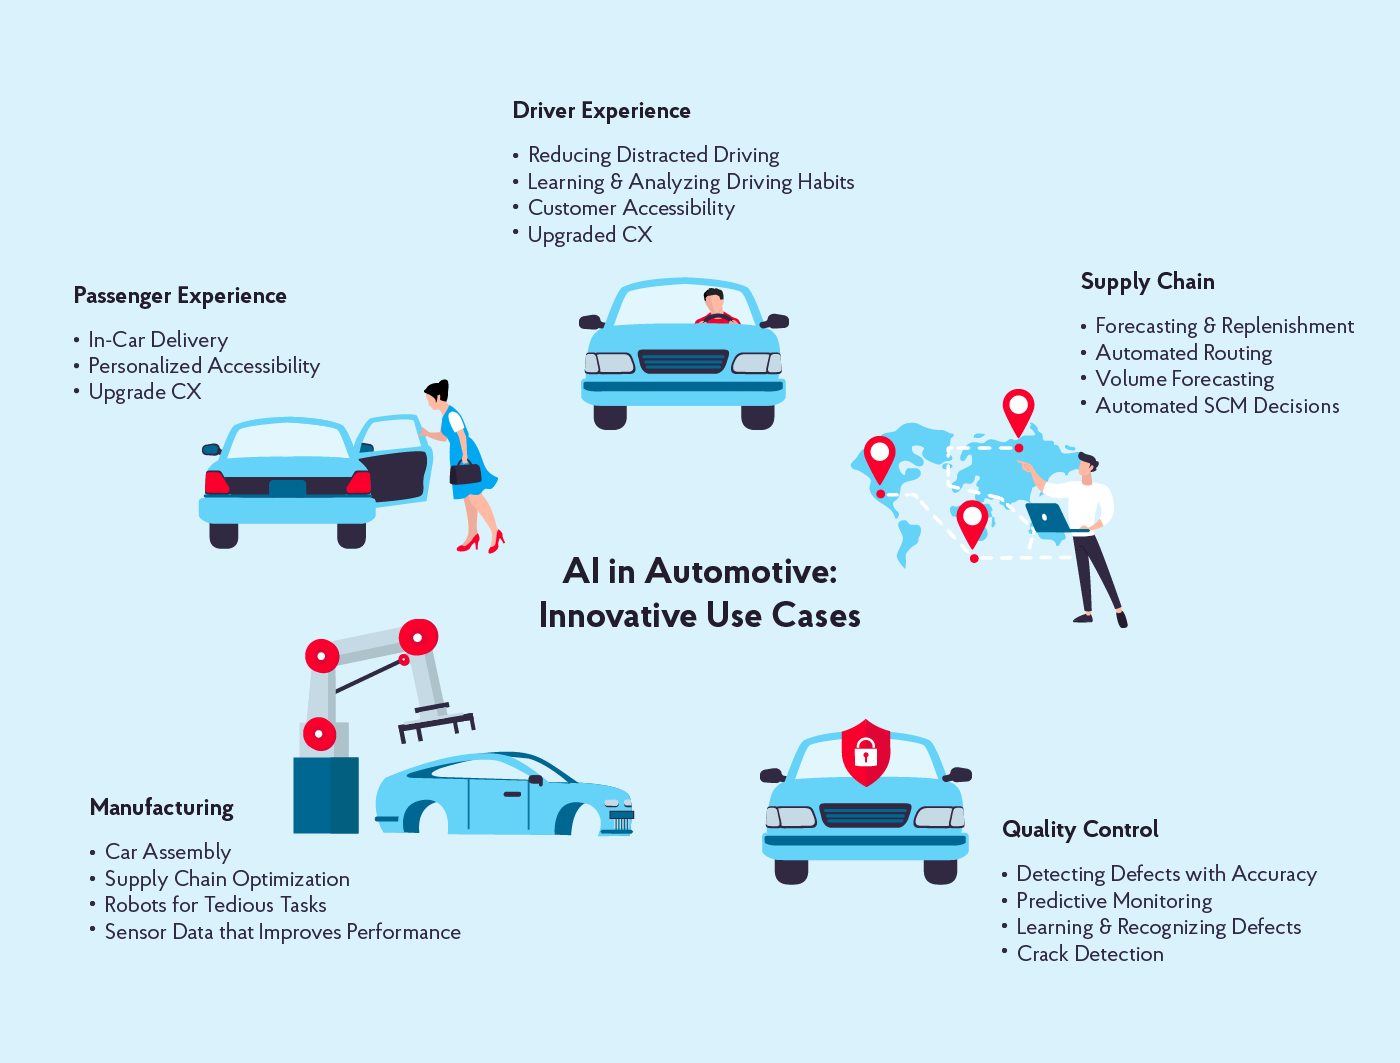 How Automakers are Investing in AI Technologies for Safer and More Reliable Vehicles